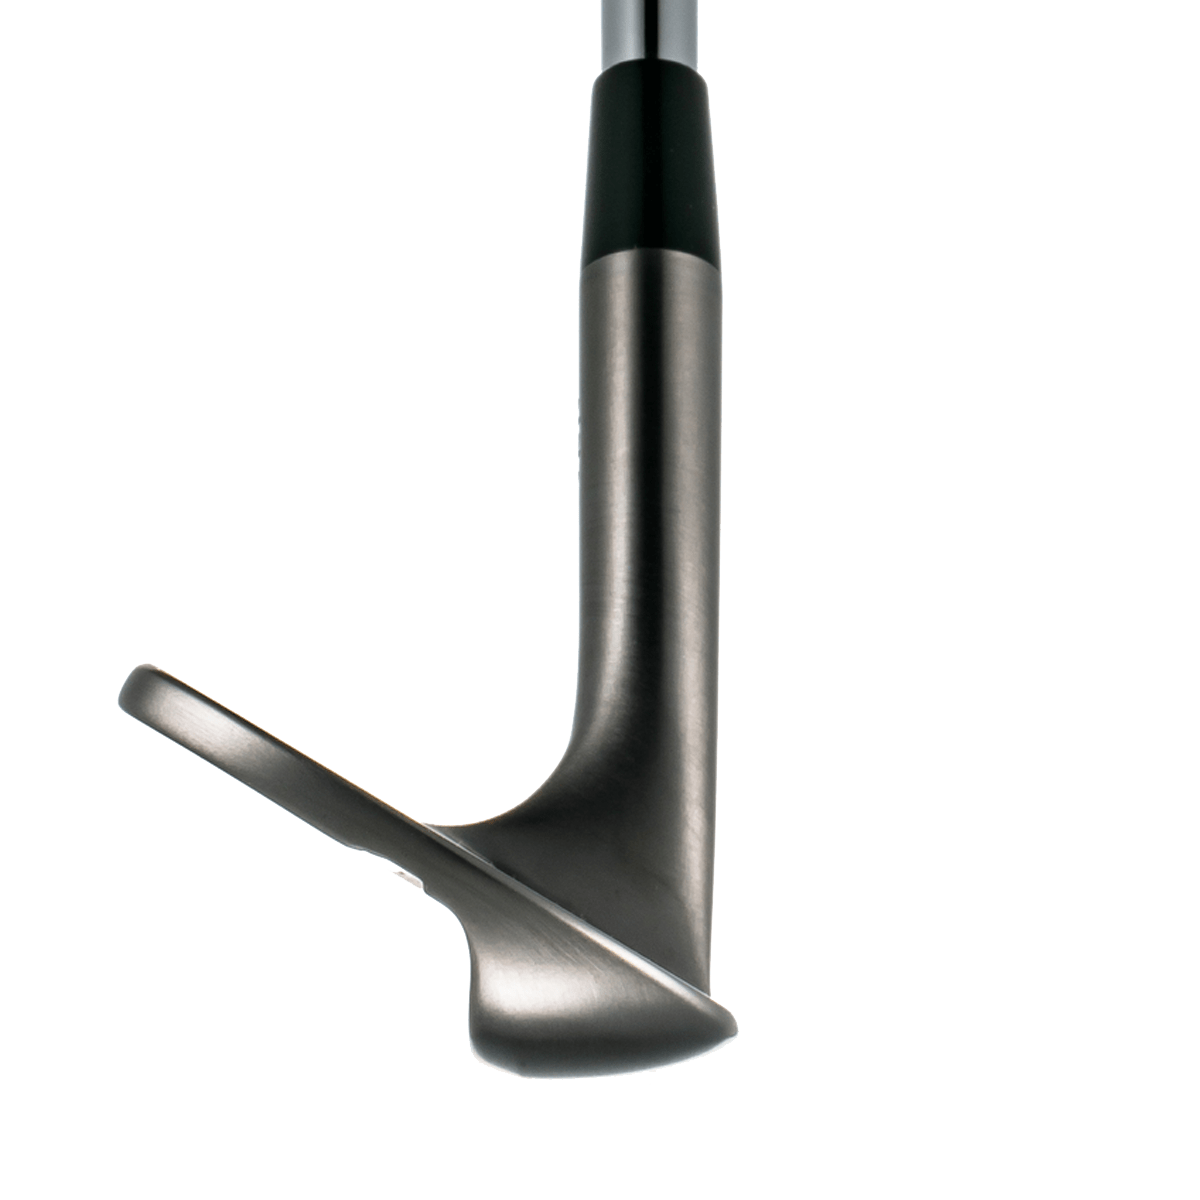 PROTOCONCEPT Golf, Forged Wedge - 37